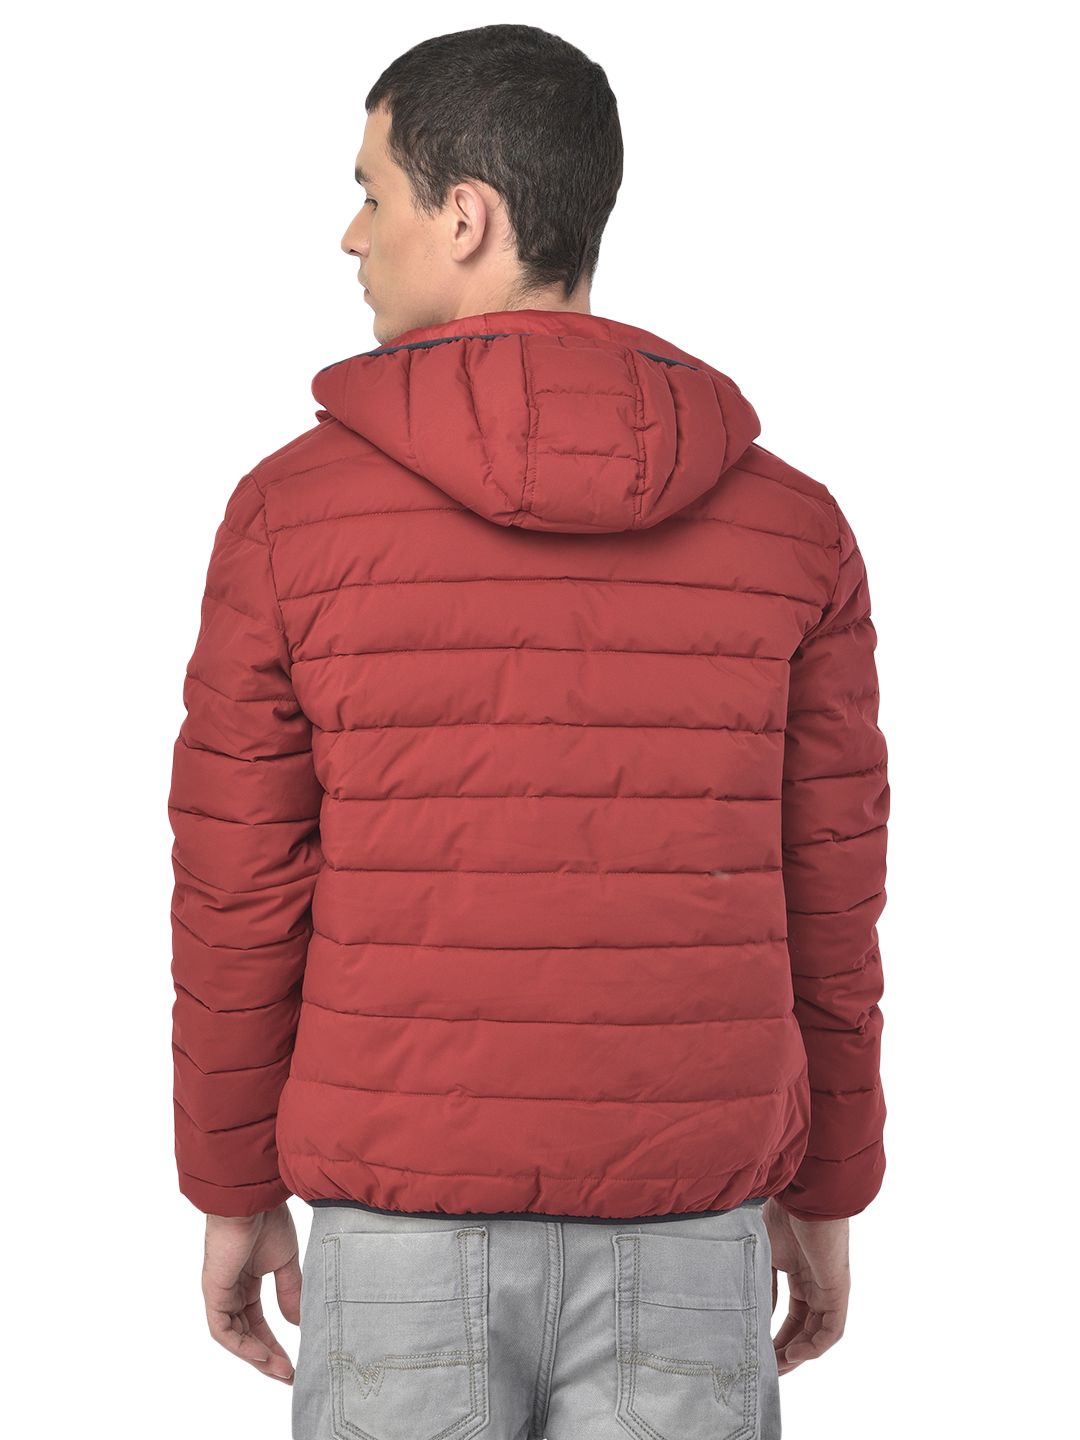 Women's Coats & Outerwear - Knit, Puffer, Quilted, and More | Coldwater  Creek